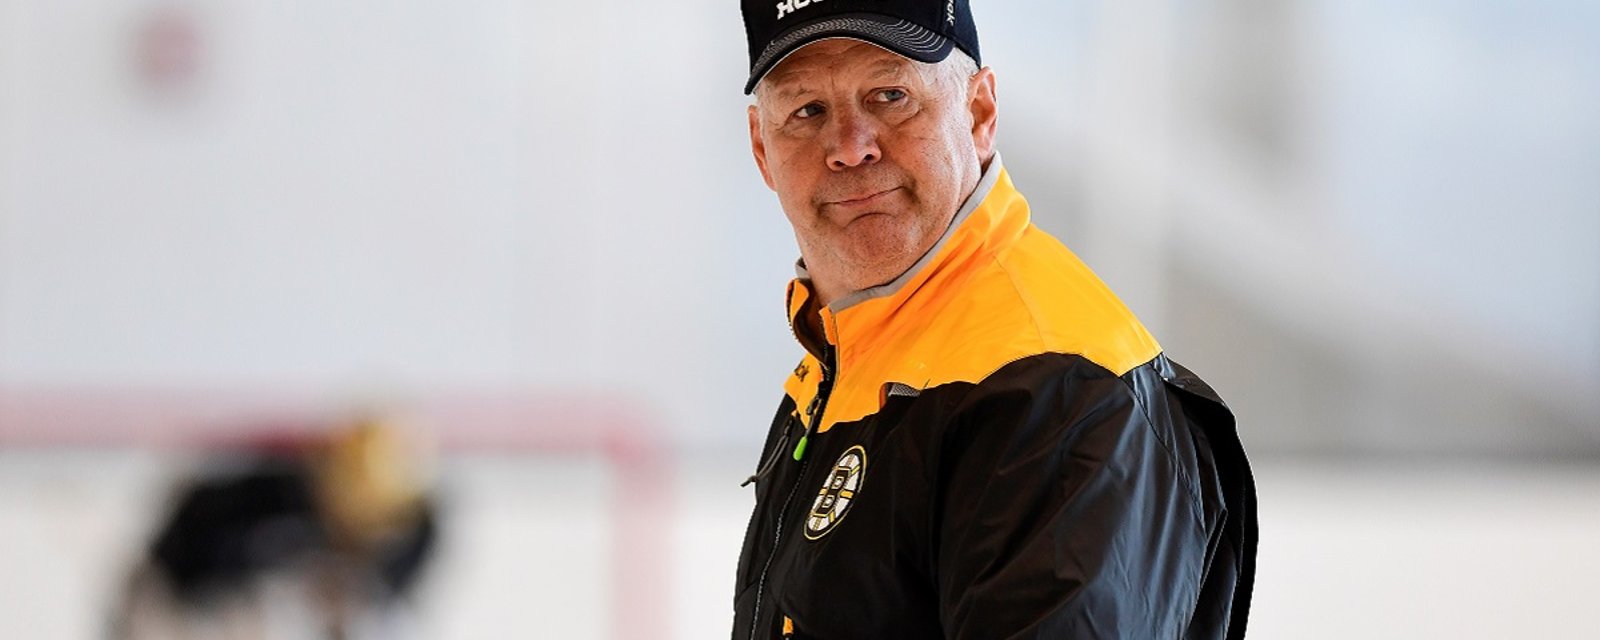 Breaking: Bruins may have held on to Julien to screw rival NHL team.